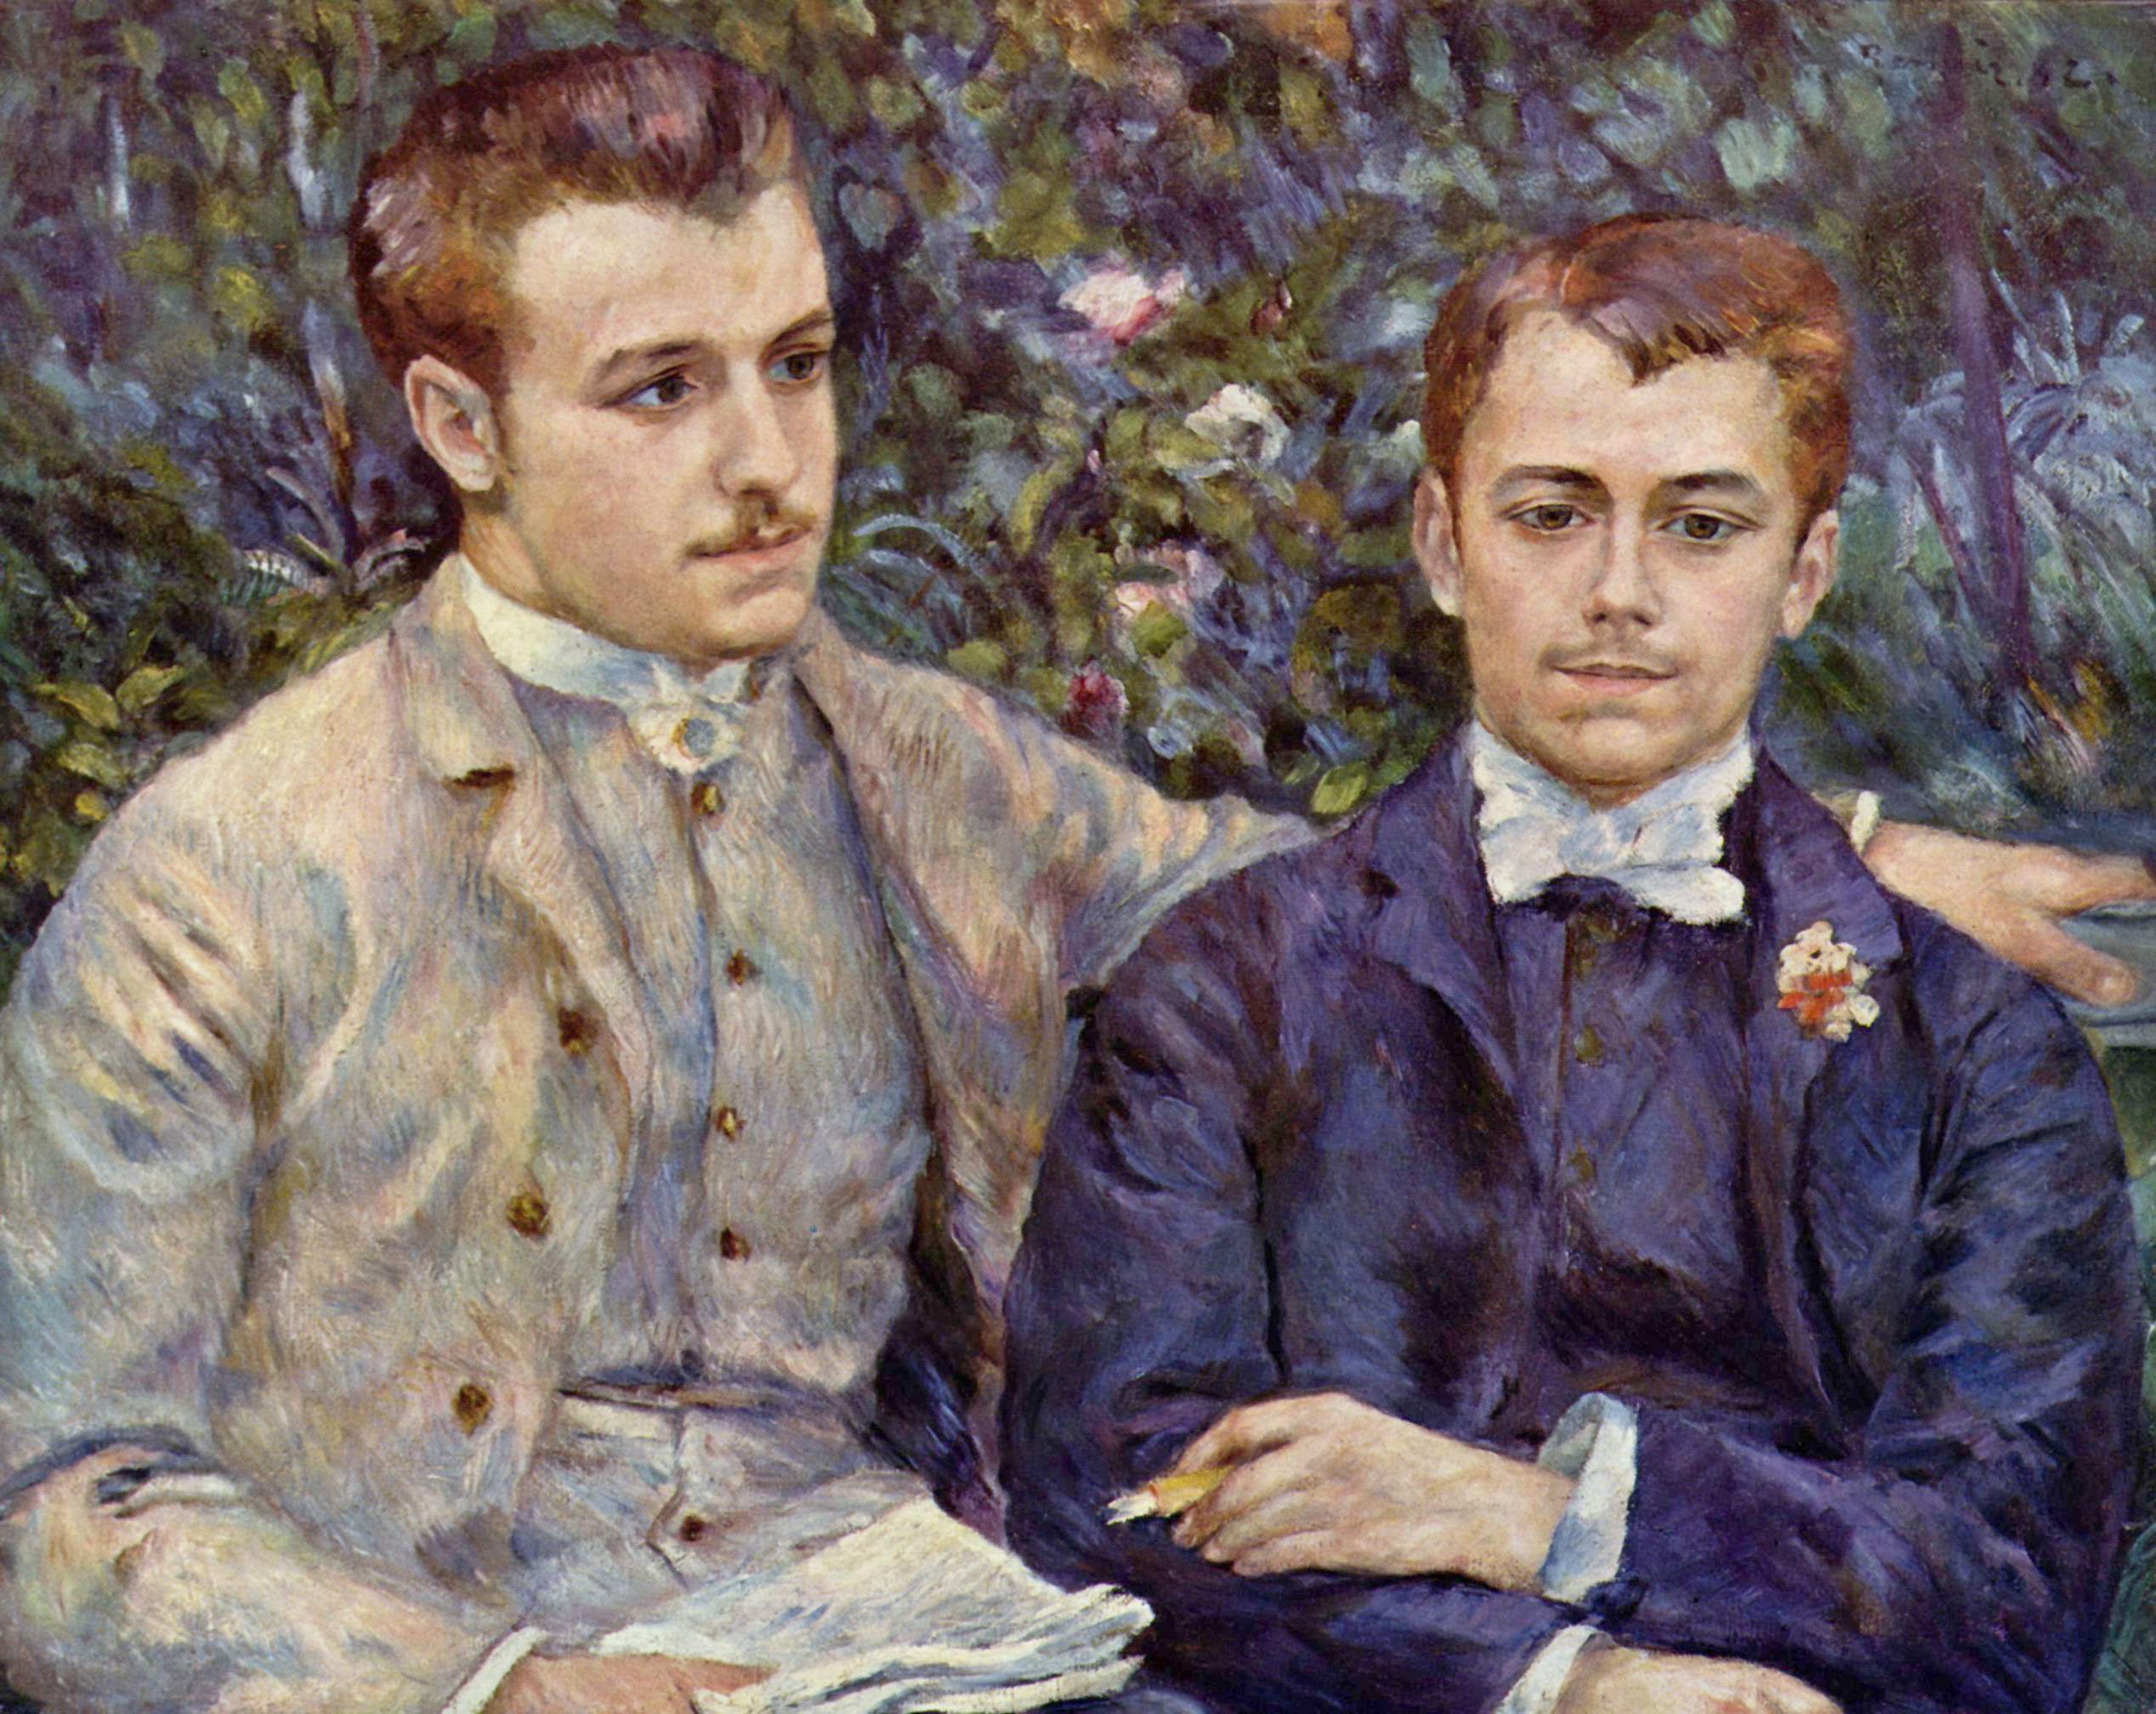 Portrait of Charles and Georges Durand Ruel by Pierre-Auguste Renoir - 1882 - 65 x 81 cm private collection